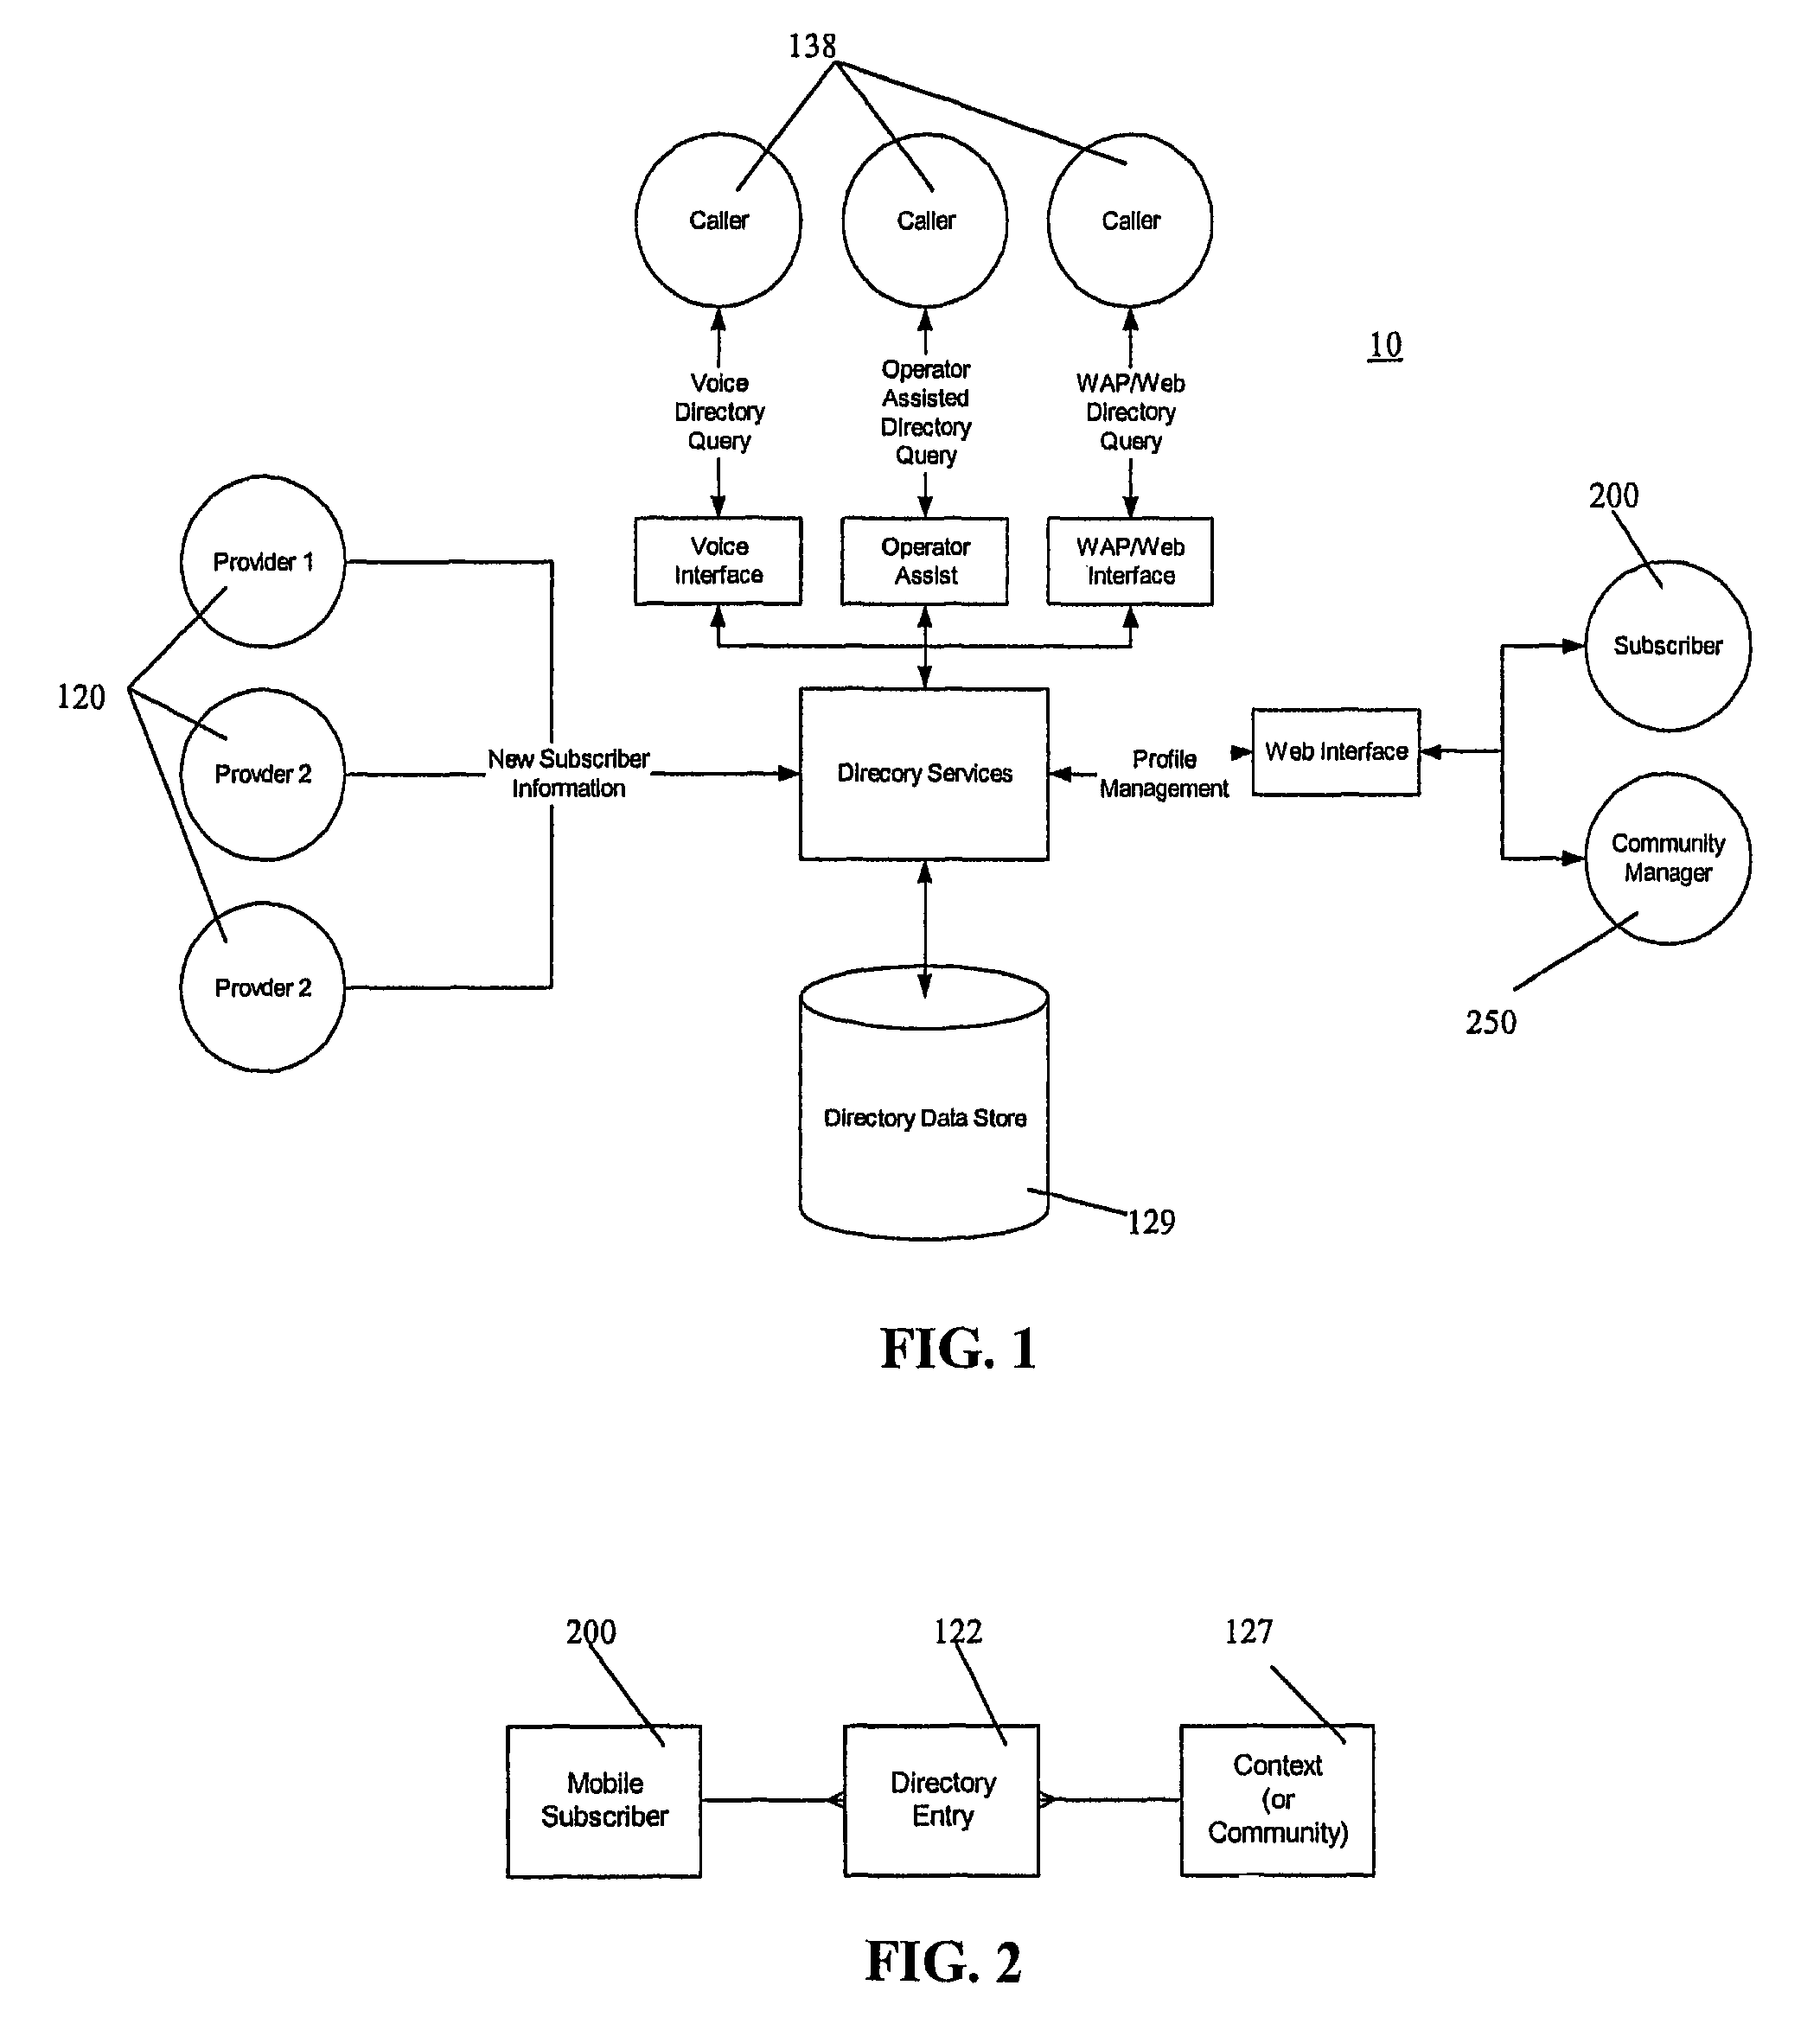 Communication connectivity via context association, advertising sponsorship, and multiple contact databases